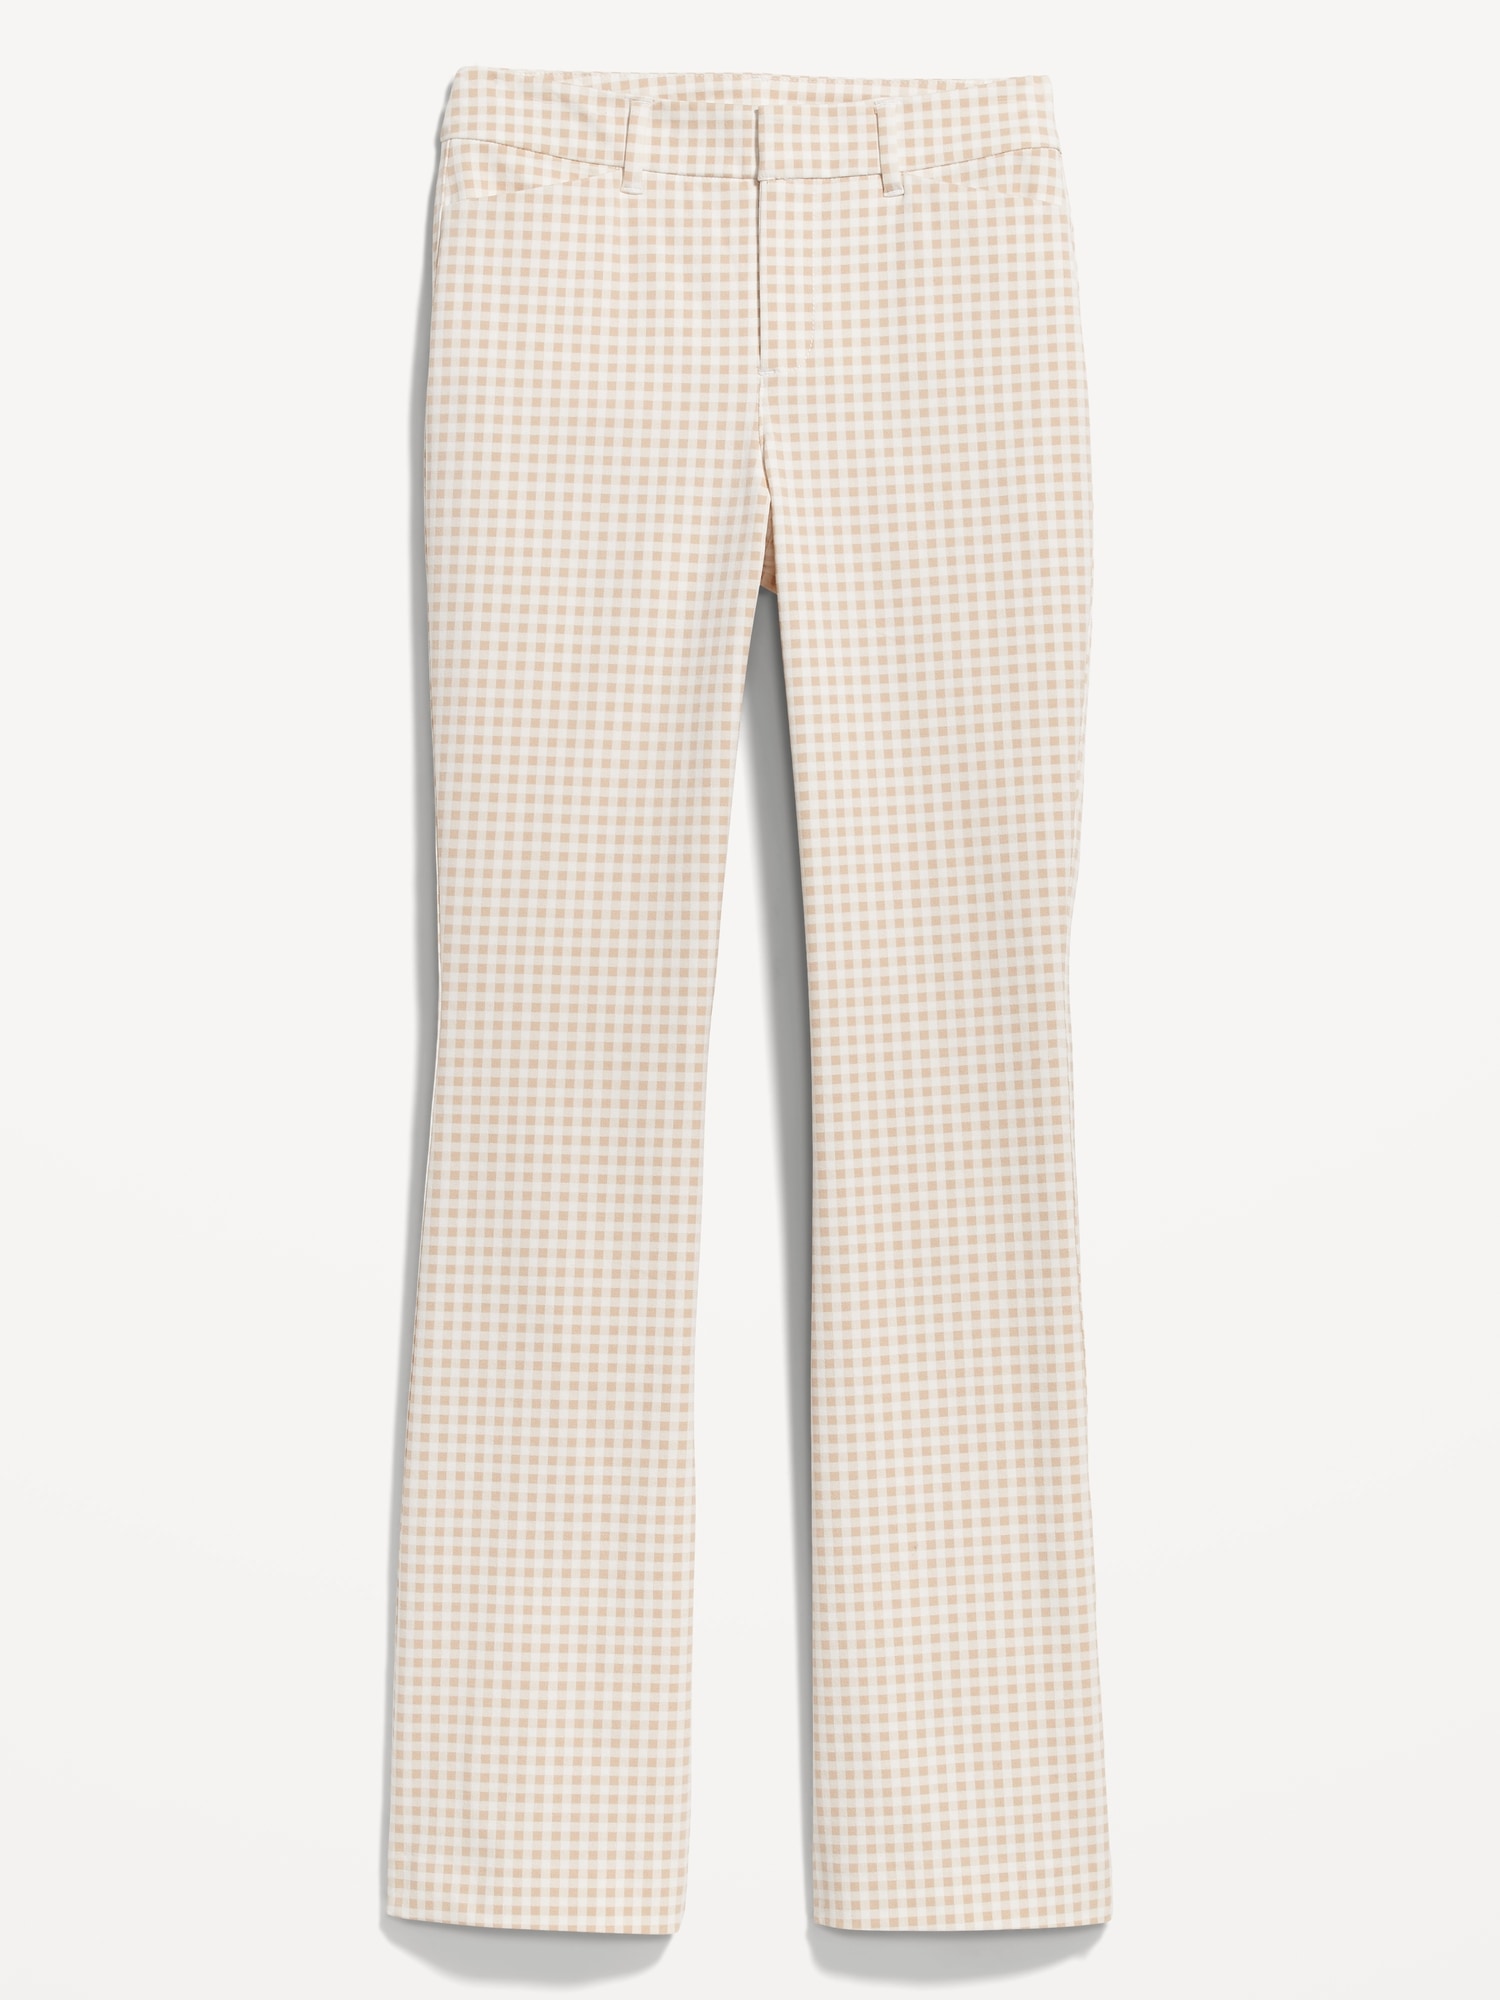 Old Navy High-Waisted Plaid Never-Fade Pixie Flare Pants for Women